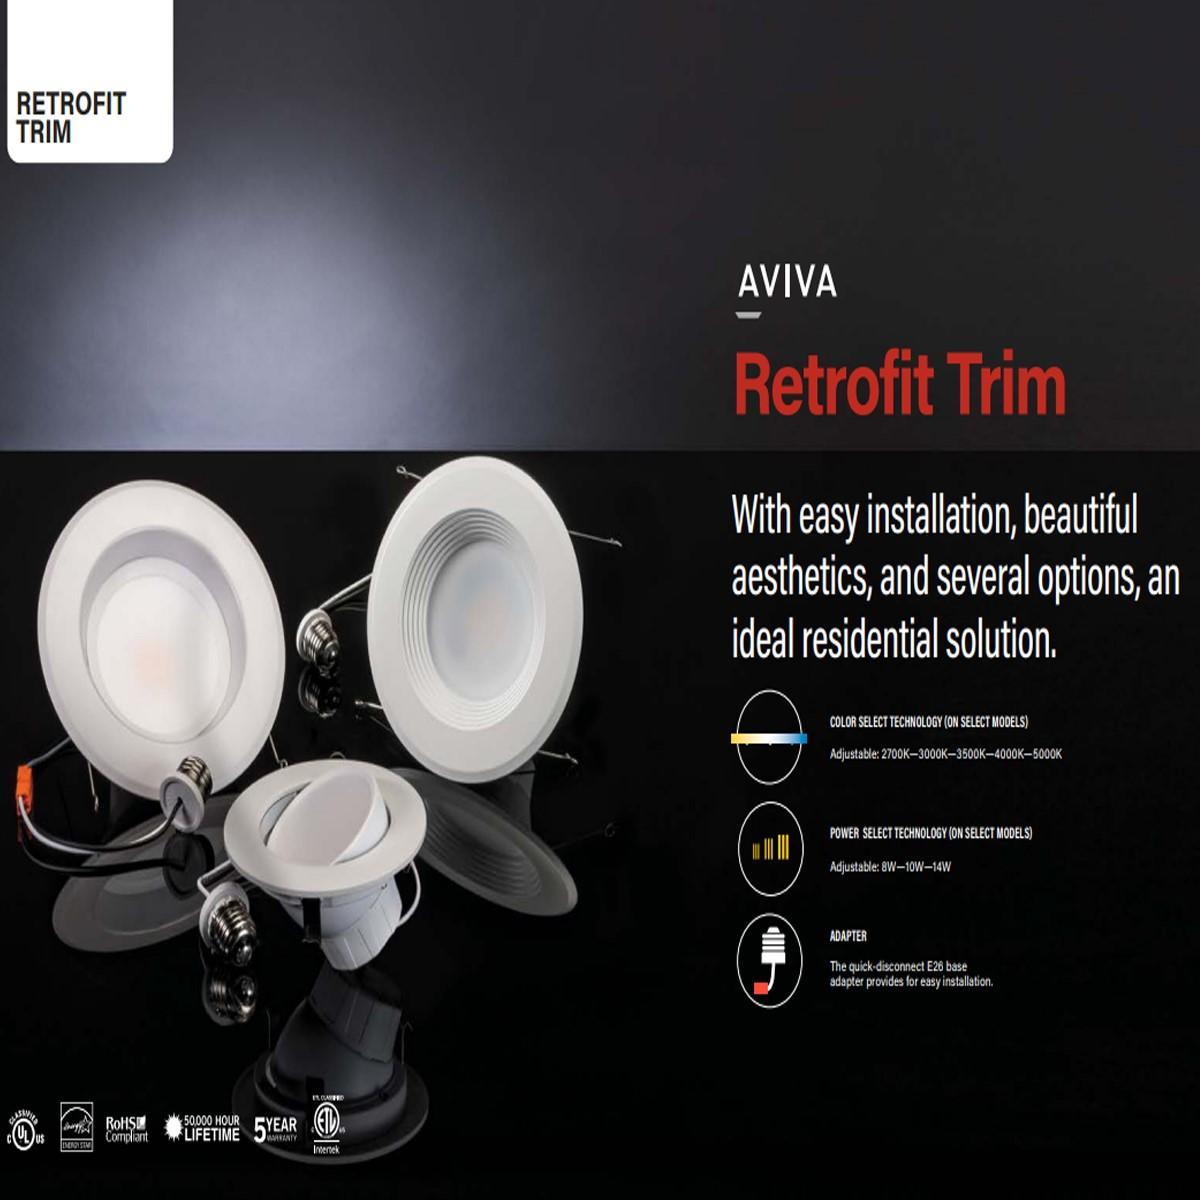 6 In. Aviva Retrofit LED Can Light, Power Select, 1250 Lumens, Selectable CCT, 2700K to 5000K, Smooth Trim - Bees Lighting